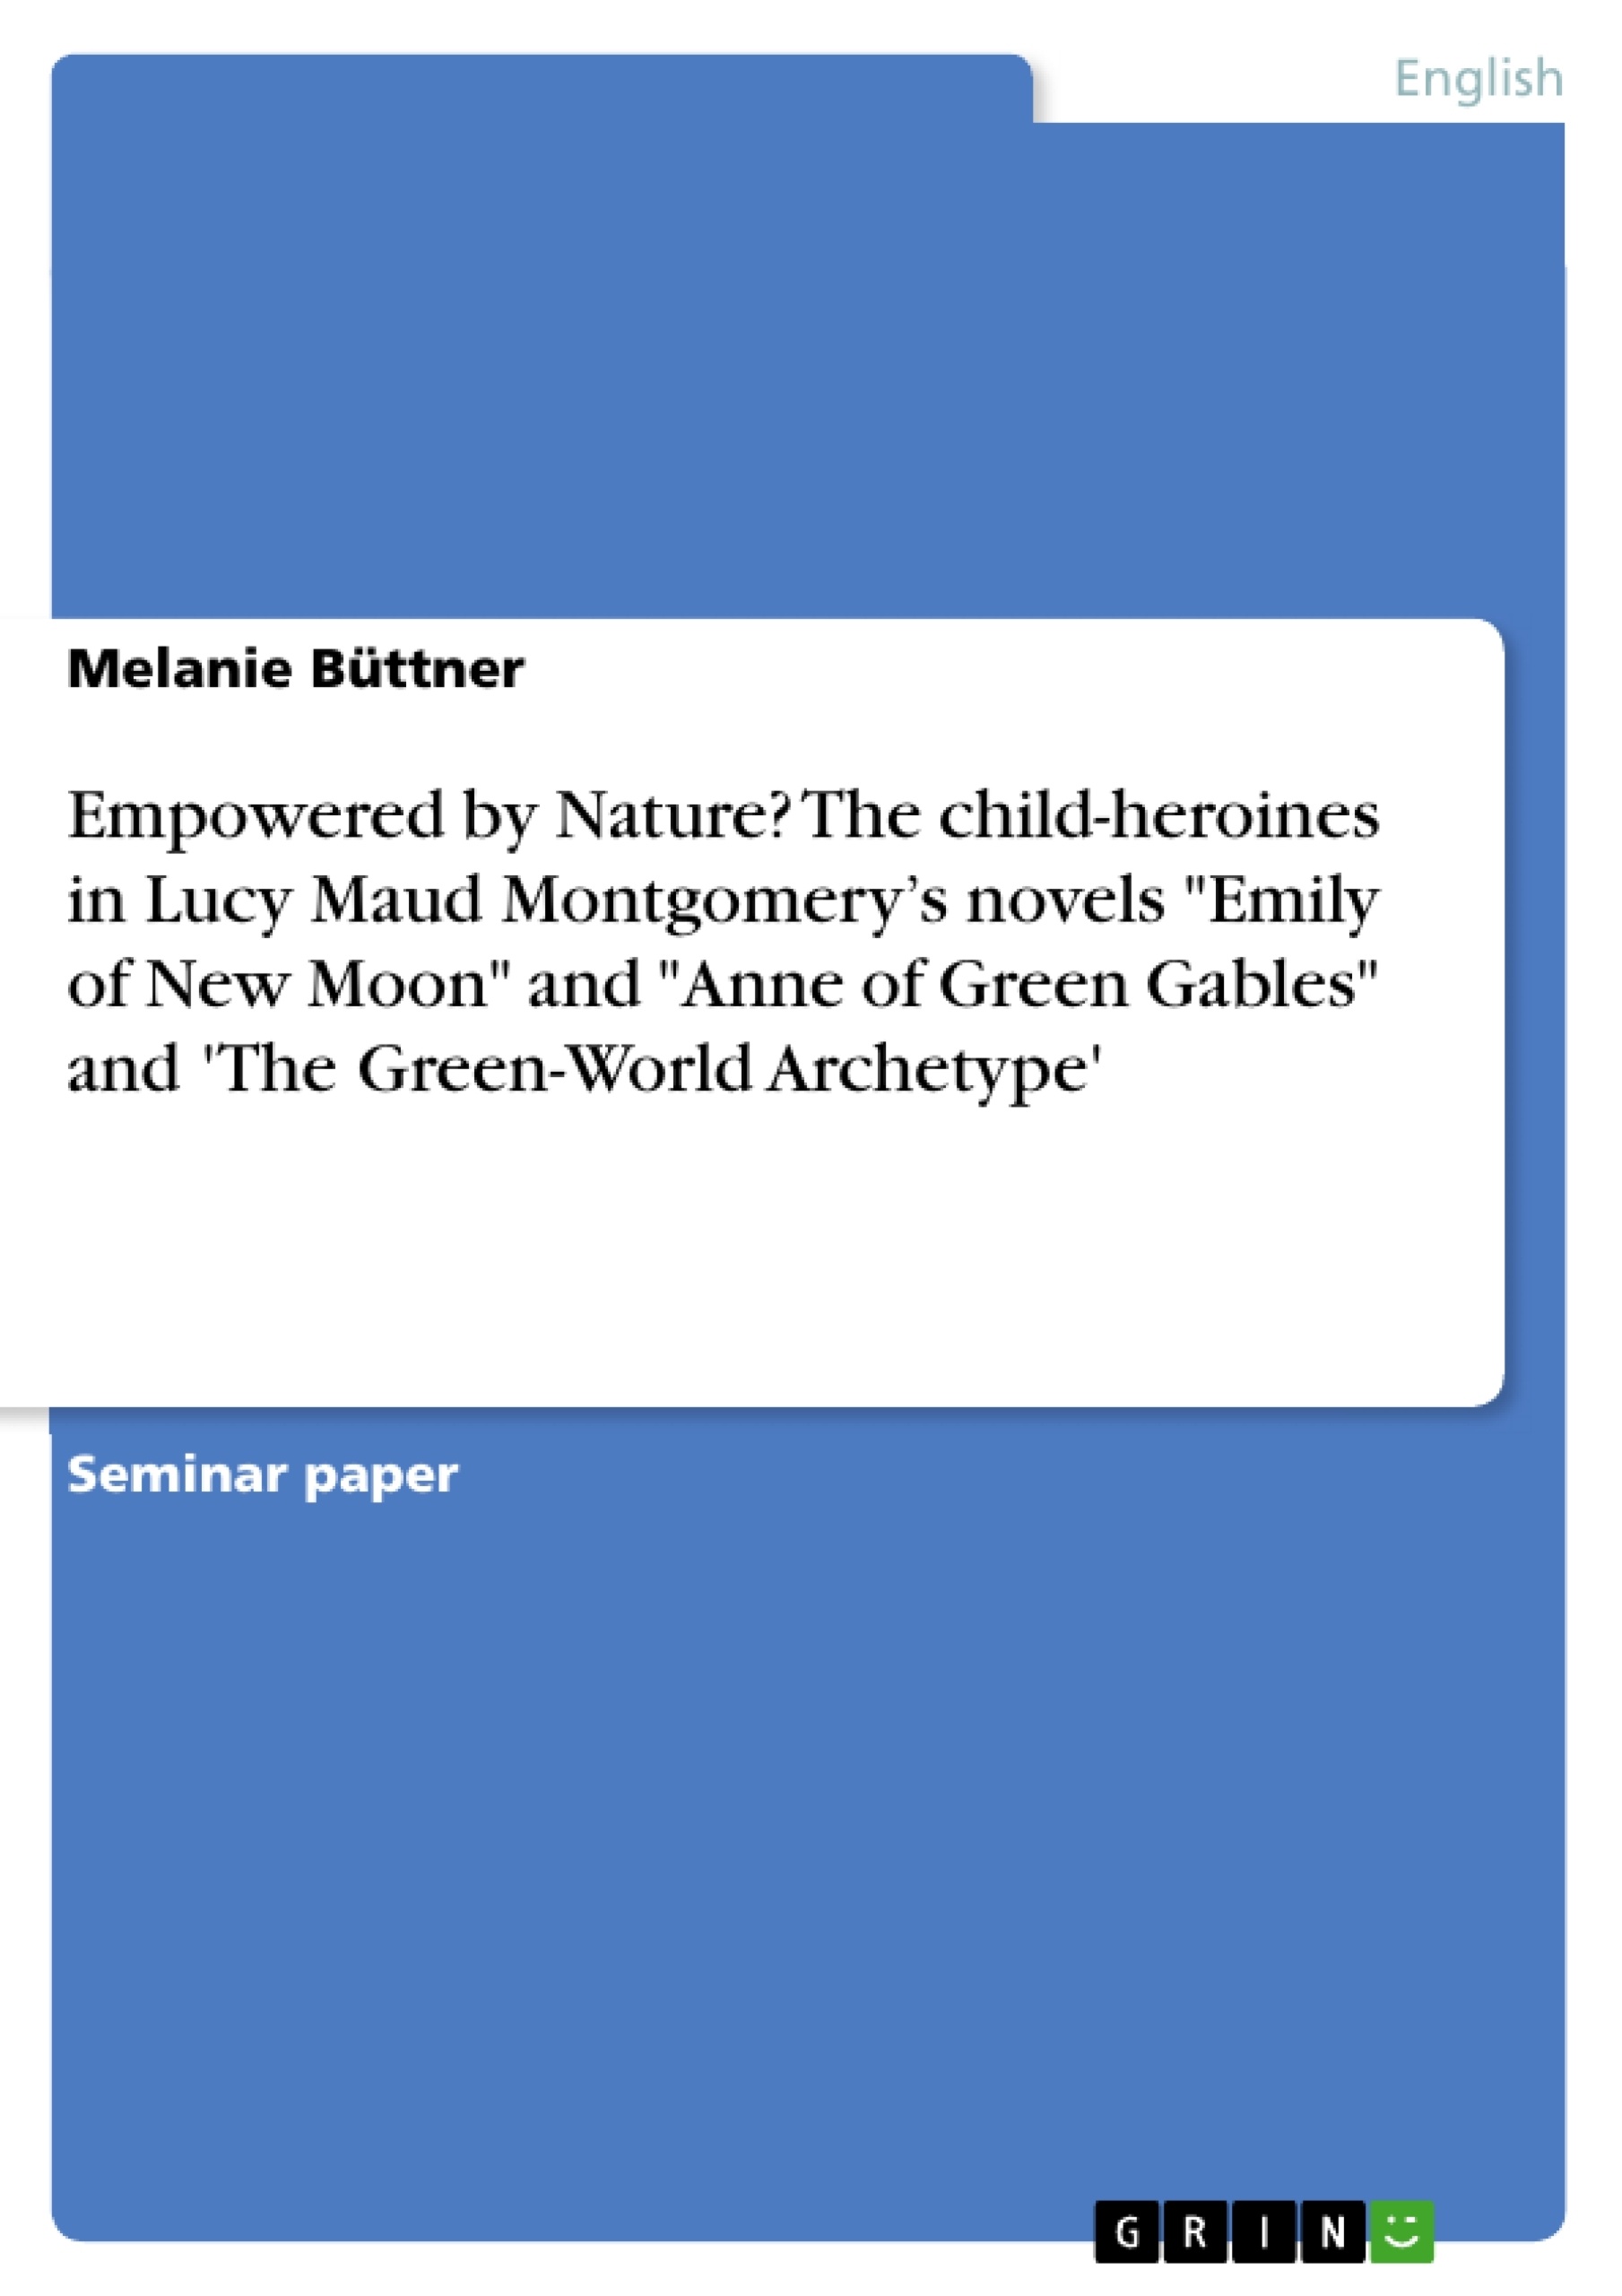 Title: Empowered by Nature? The child-heroines in Lucy Maud Montgomery’s novels "Emily of New Moon" and "Anne of Green Gables" and 'The Green-World Archetype'